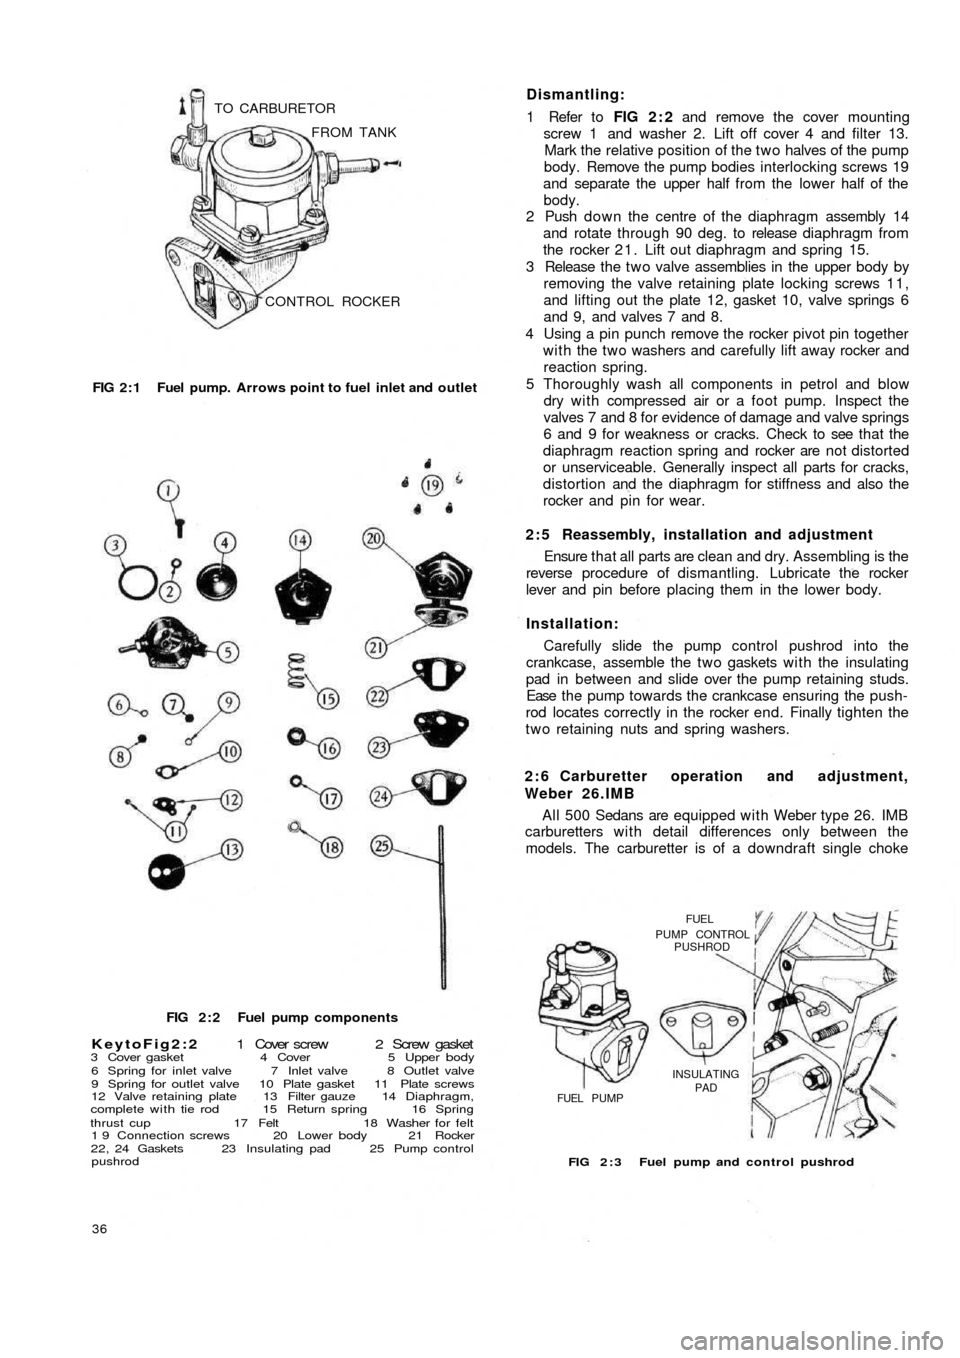 FIAT 500 1970 1.G Workshop Manual CONTROL ROCKER FROM TANK TO CARBURETOR
FIG 2 : 1  Fuel pump. Arrows point to fuel  inlet and outlet
FIG 2 : 2  Fuel pump components
KeytoFig2:2 1  Cover  screw  2  Screw  gasket3 Cover gasket 4 Cover 